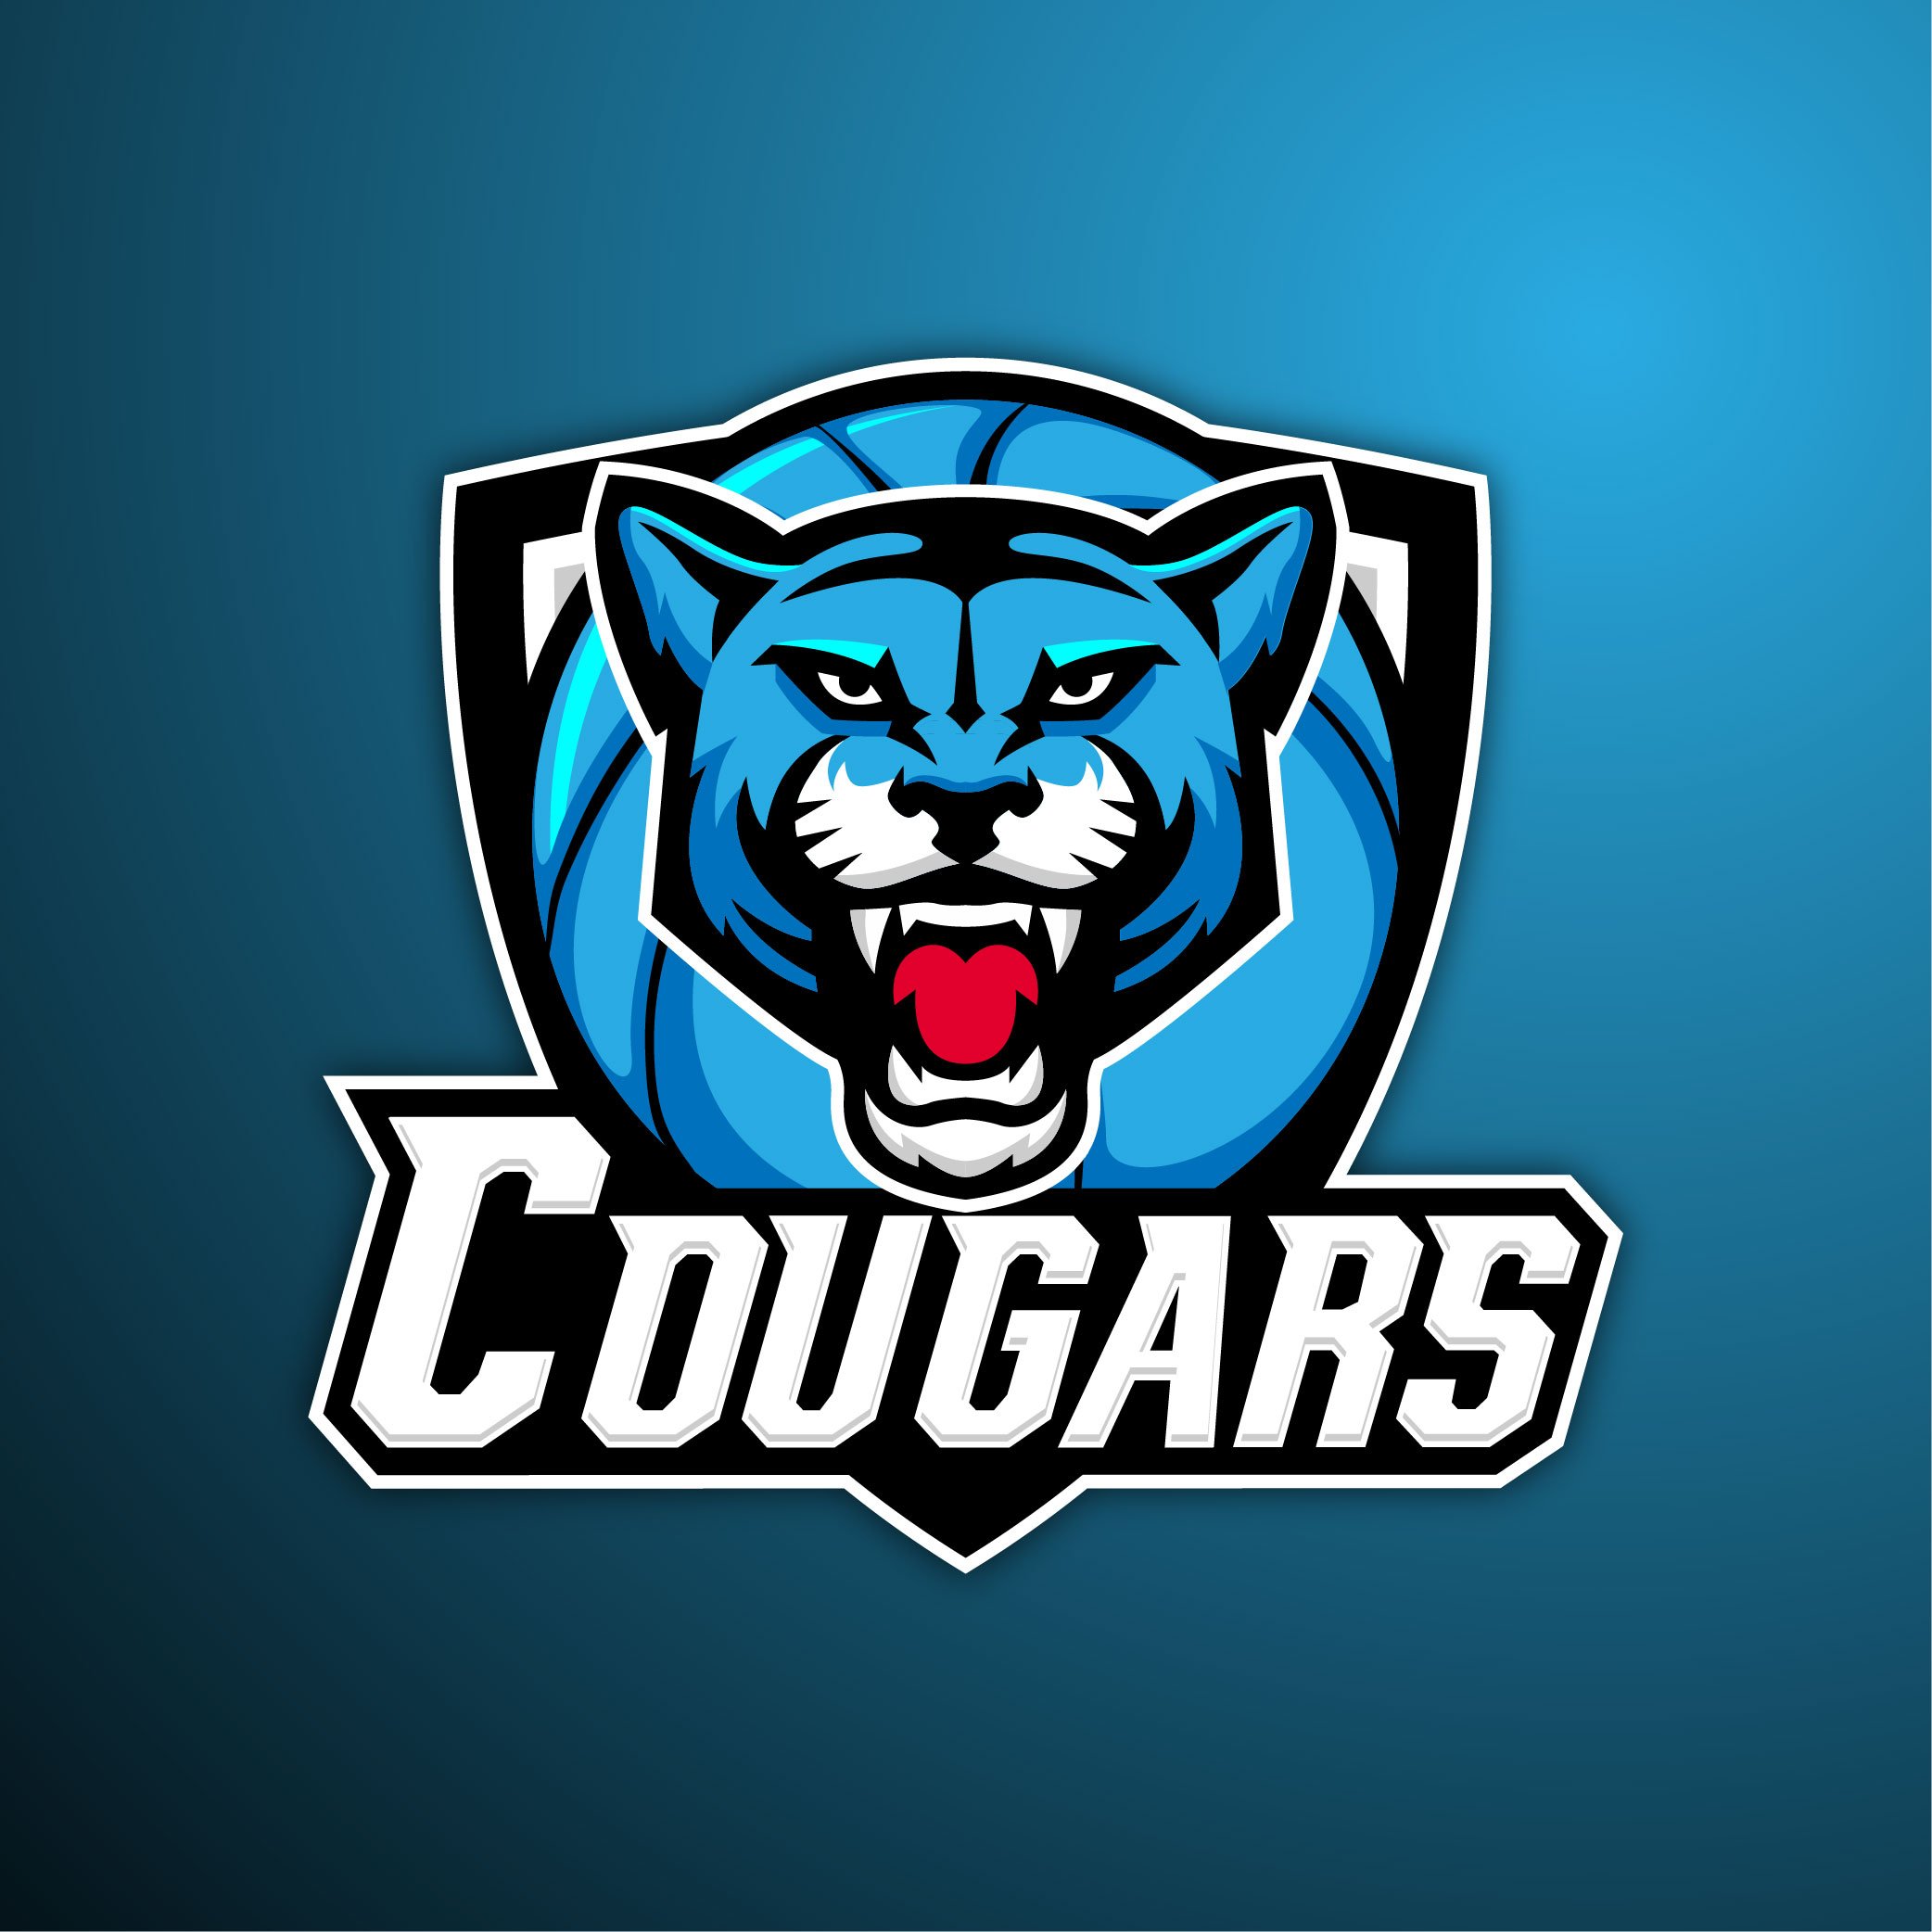 PORT HURON COUGARS LATEST ADDITION TO ABA’S EXPANSION – ABA Basketball